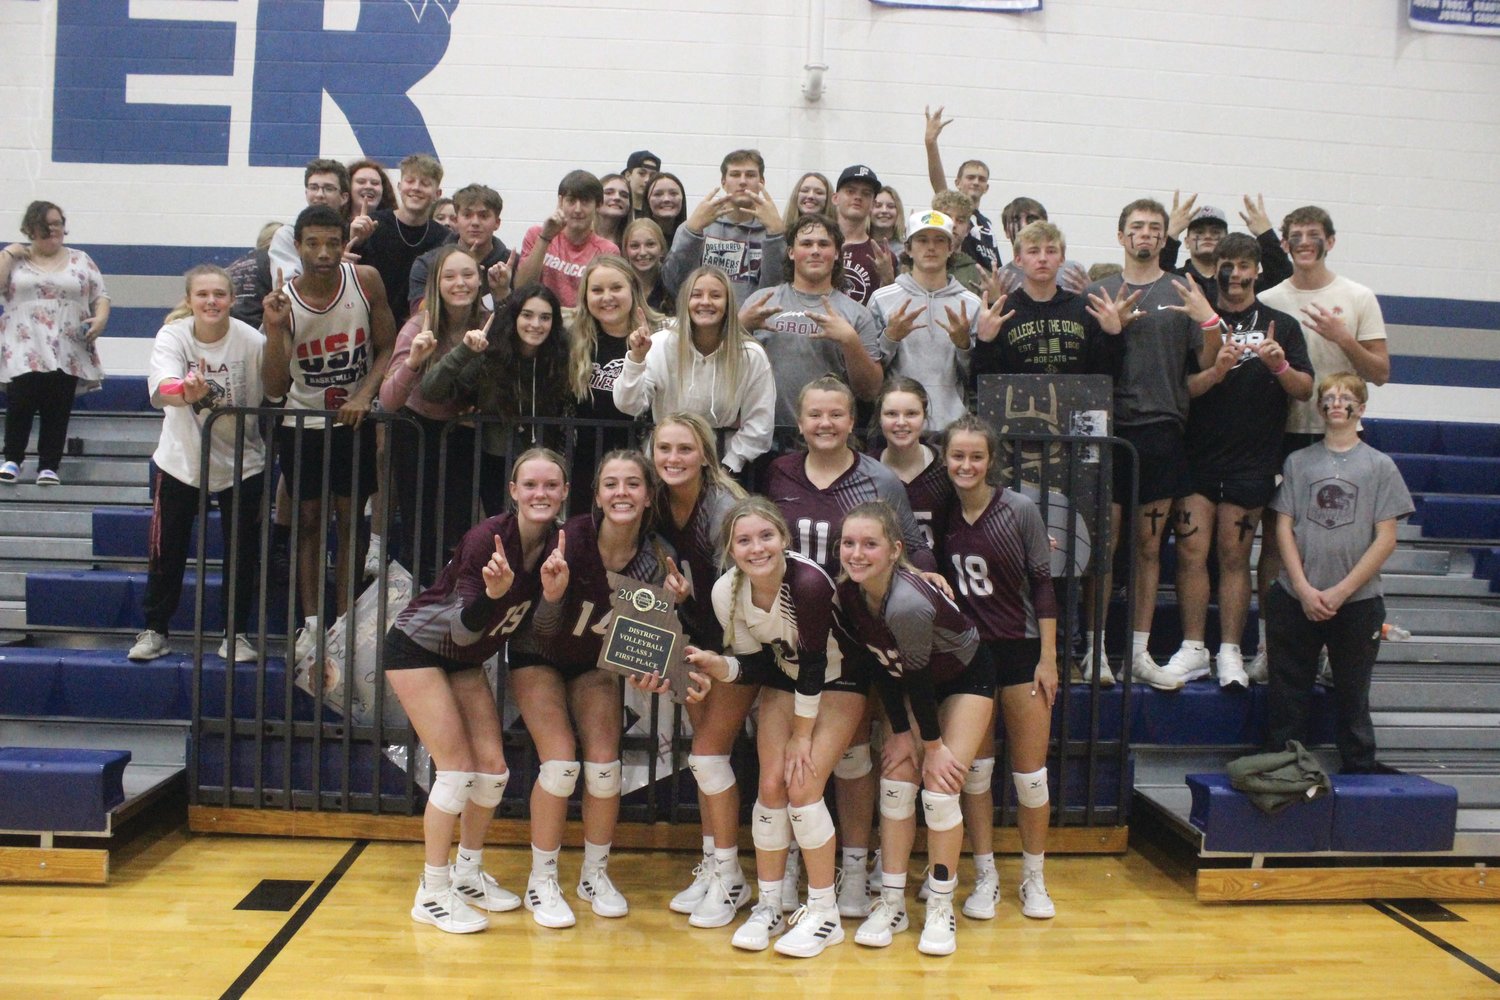 The Mountain Grove Lady Panthers' volleyball team celebrates with some fans after the big district title victory.